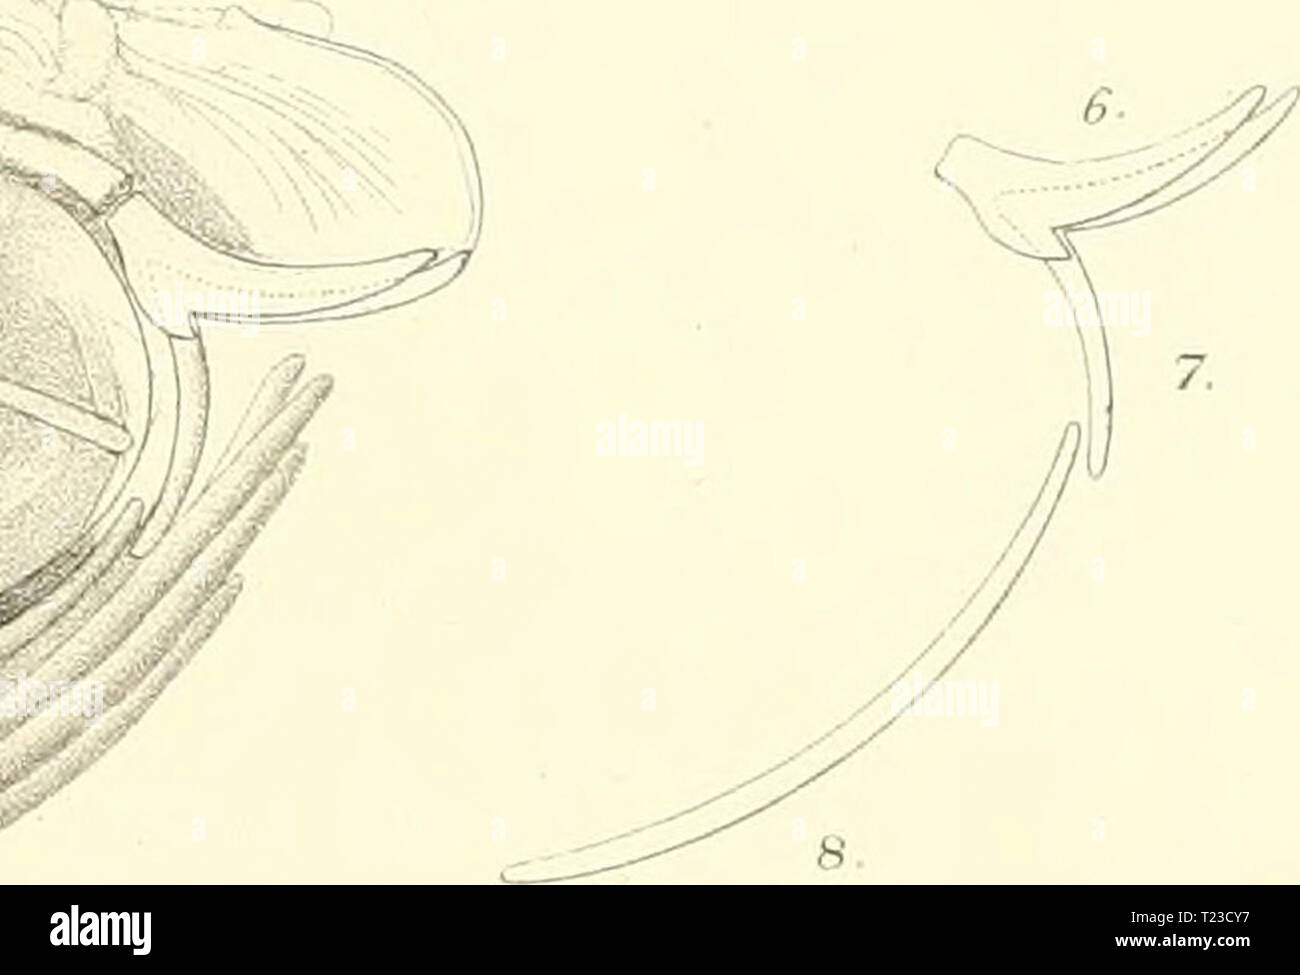 Archive image from page 122 of The Discoboli Cyclopteridæ, Liparopsidæ, and The Discoboli. Cyclopteridæ, Liparopsidæ, and Liparididæ  discobolicyclopt00garm Year: 1892  Discoboli PlK. f-A r-'V    Y/ .4s: / ILlPARlS MUCOSUS  vn,i,ur .1...V... o'JMPUS 3-COTTUS OCTODECIMSPINOSUS Stock Photo